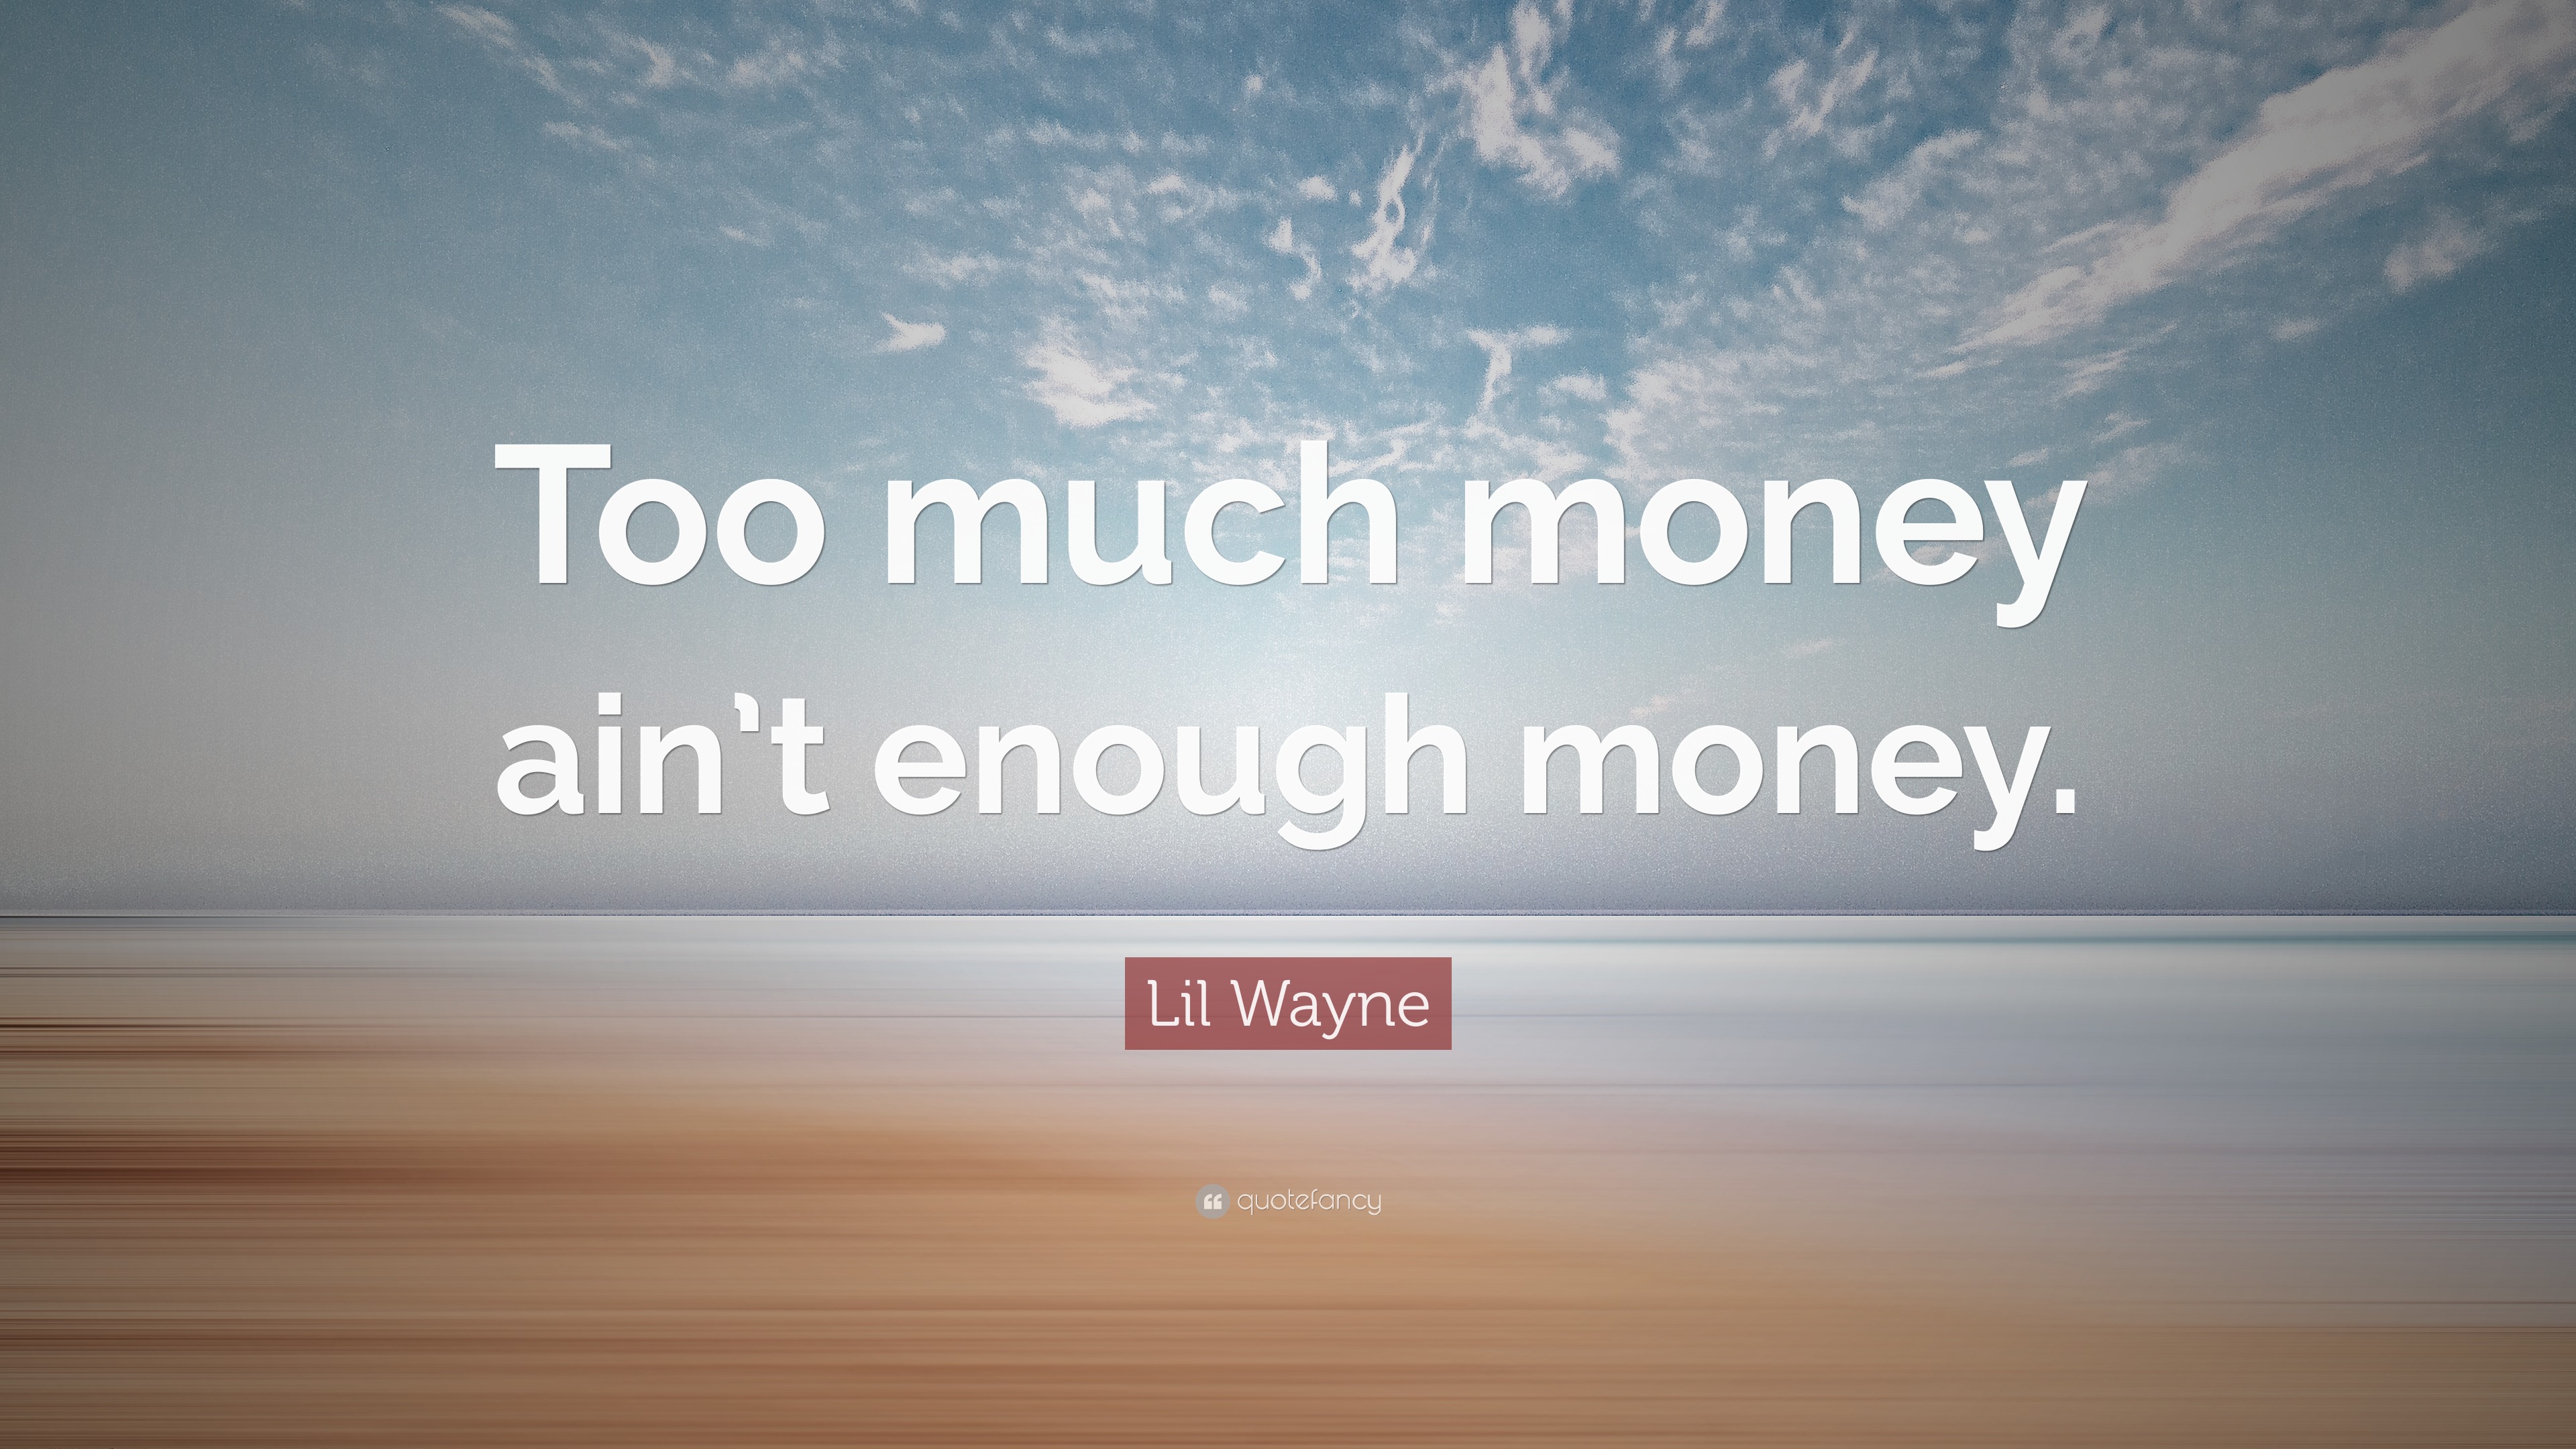 Lil Wayne Quote: “Too much money ain’t enough money.”